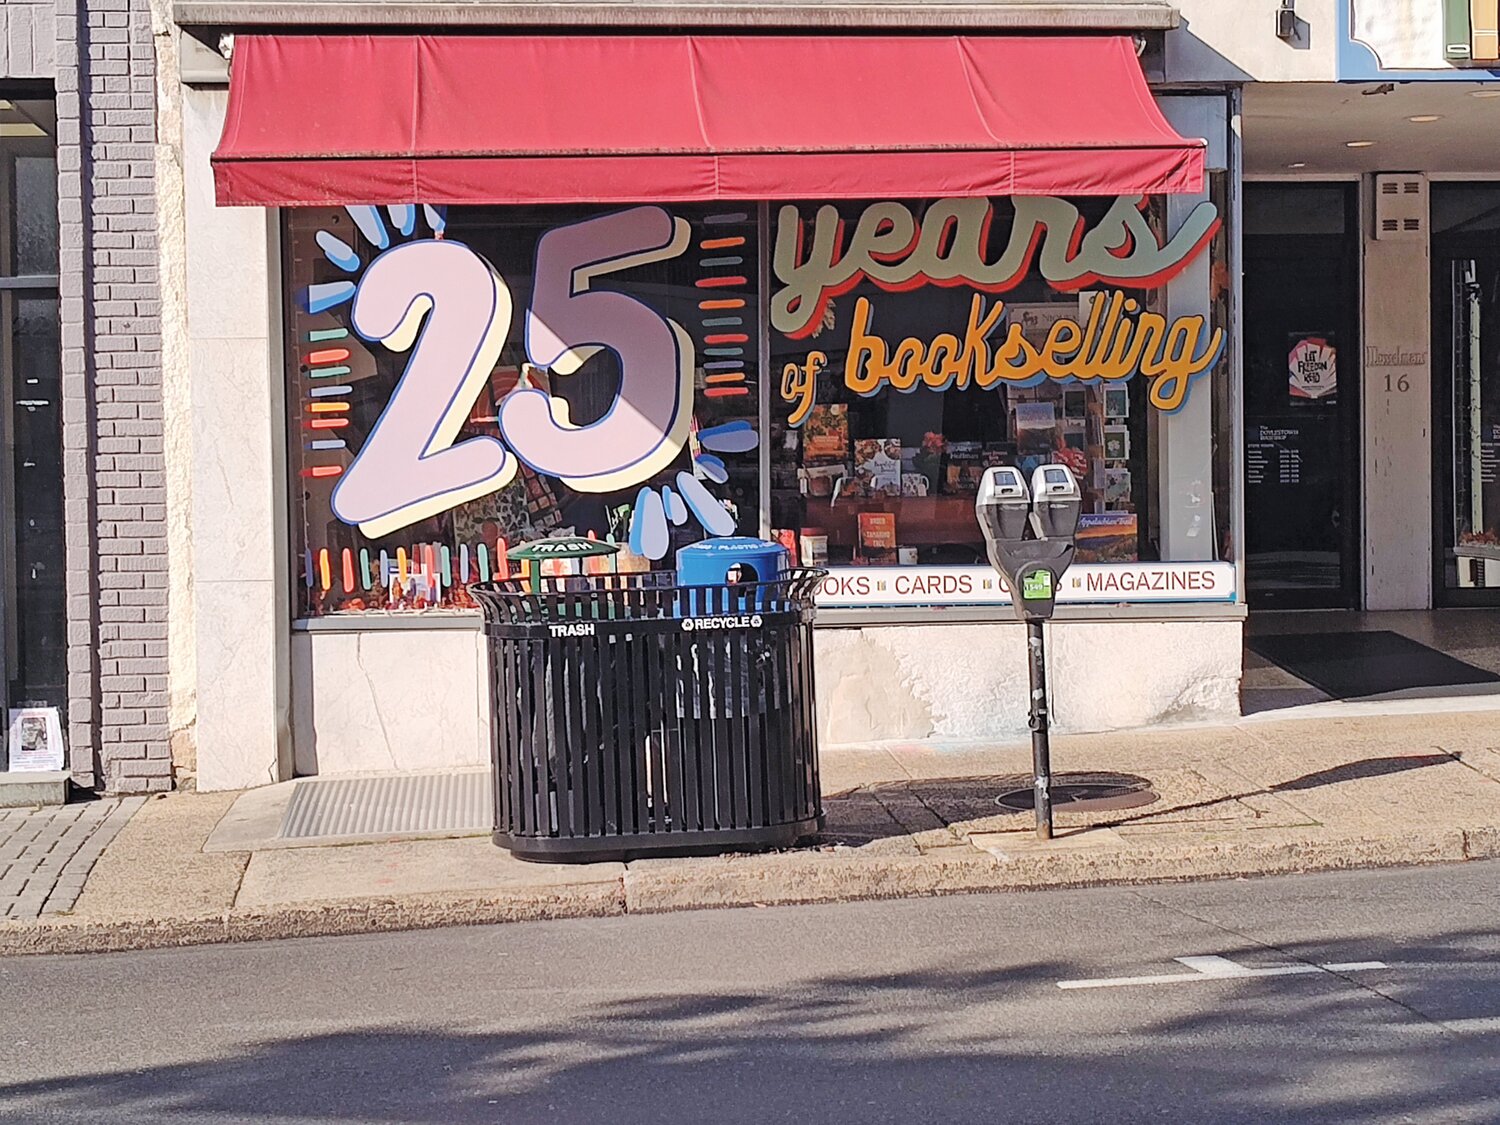 The front of the Doylestown Bookshop proclaims “25 years of bookselling.”